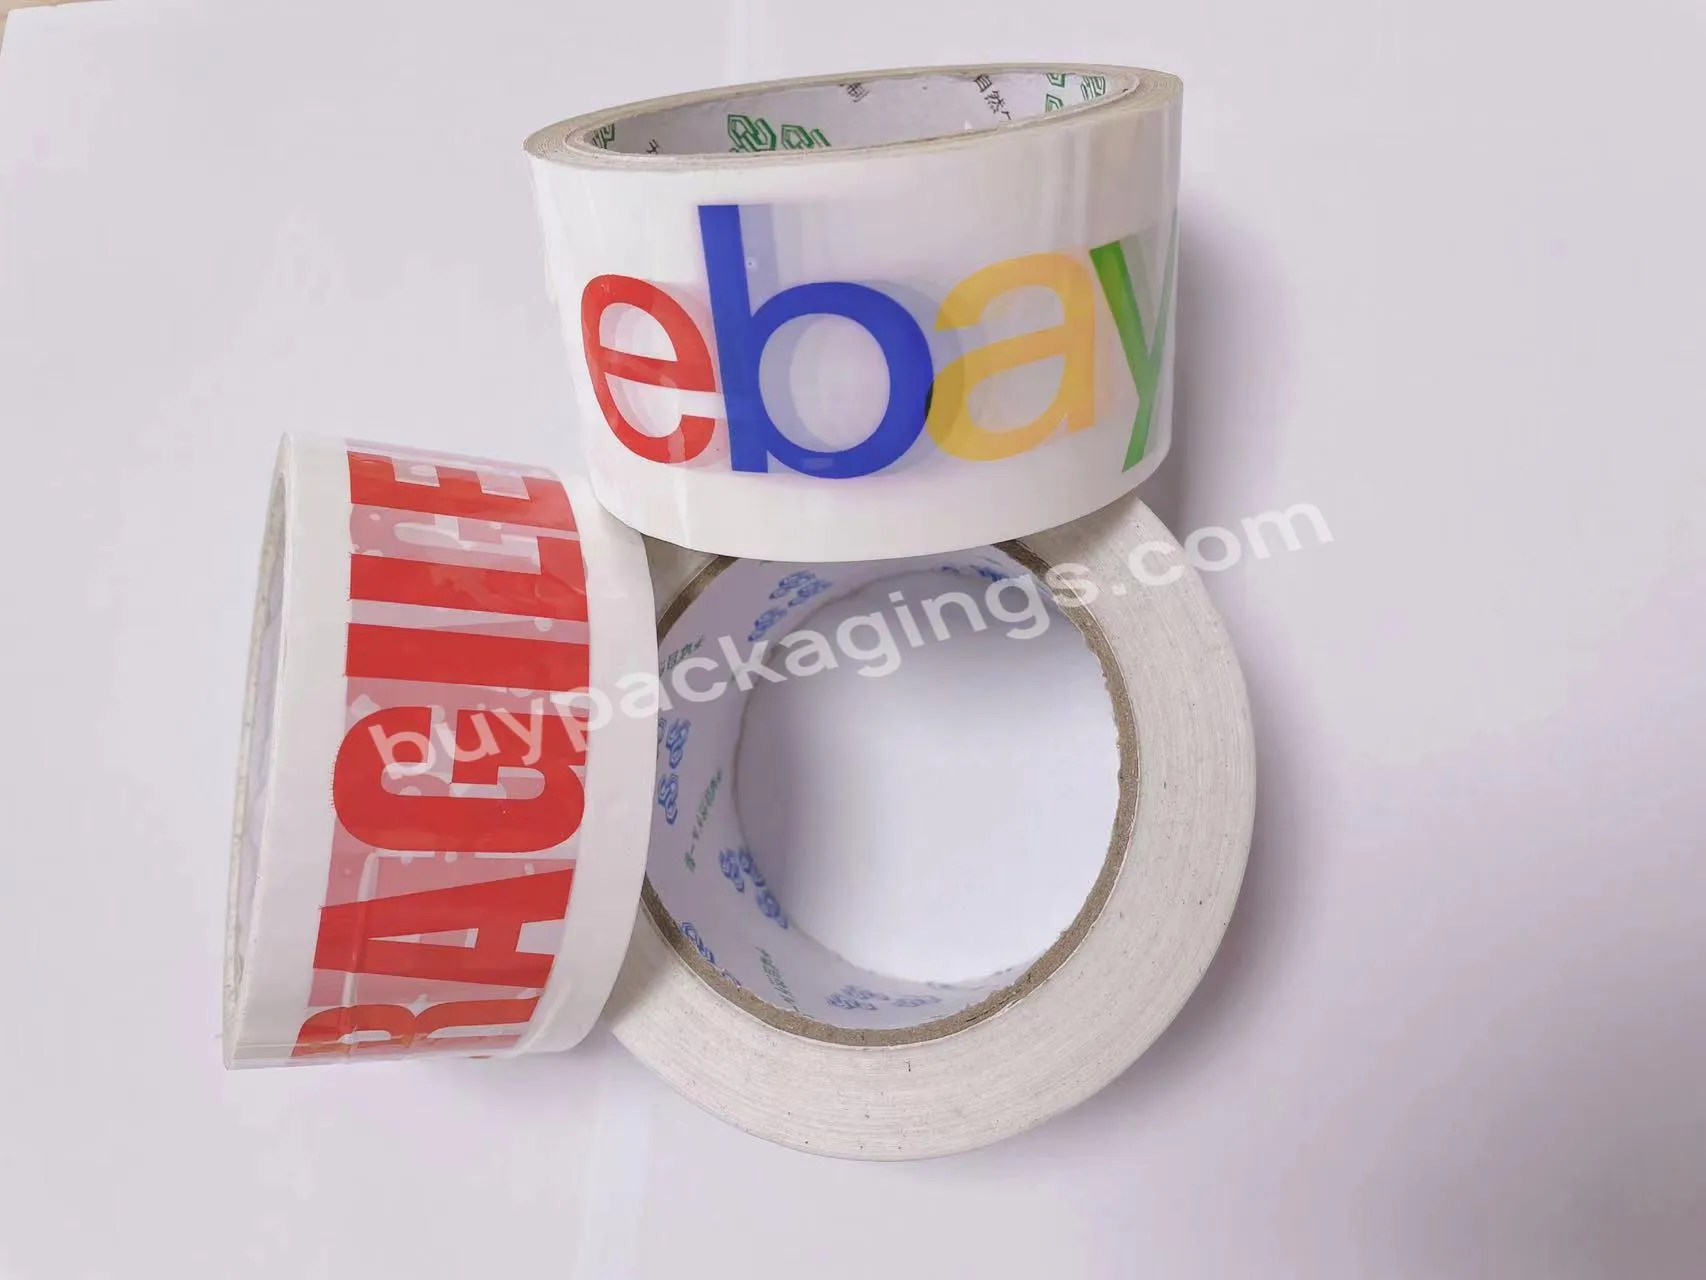 High Quality Carton Box Sealing Package Waterproof Clear Low Noise Opp Printed Tape No Noise Opp Tape - Buy Opp Tape,Opp Printed Tape,No Noise Opp Tape.